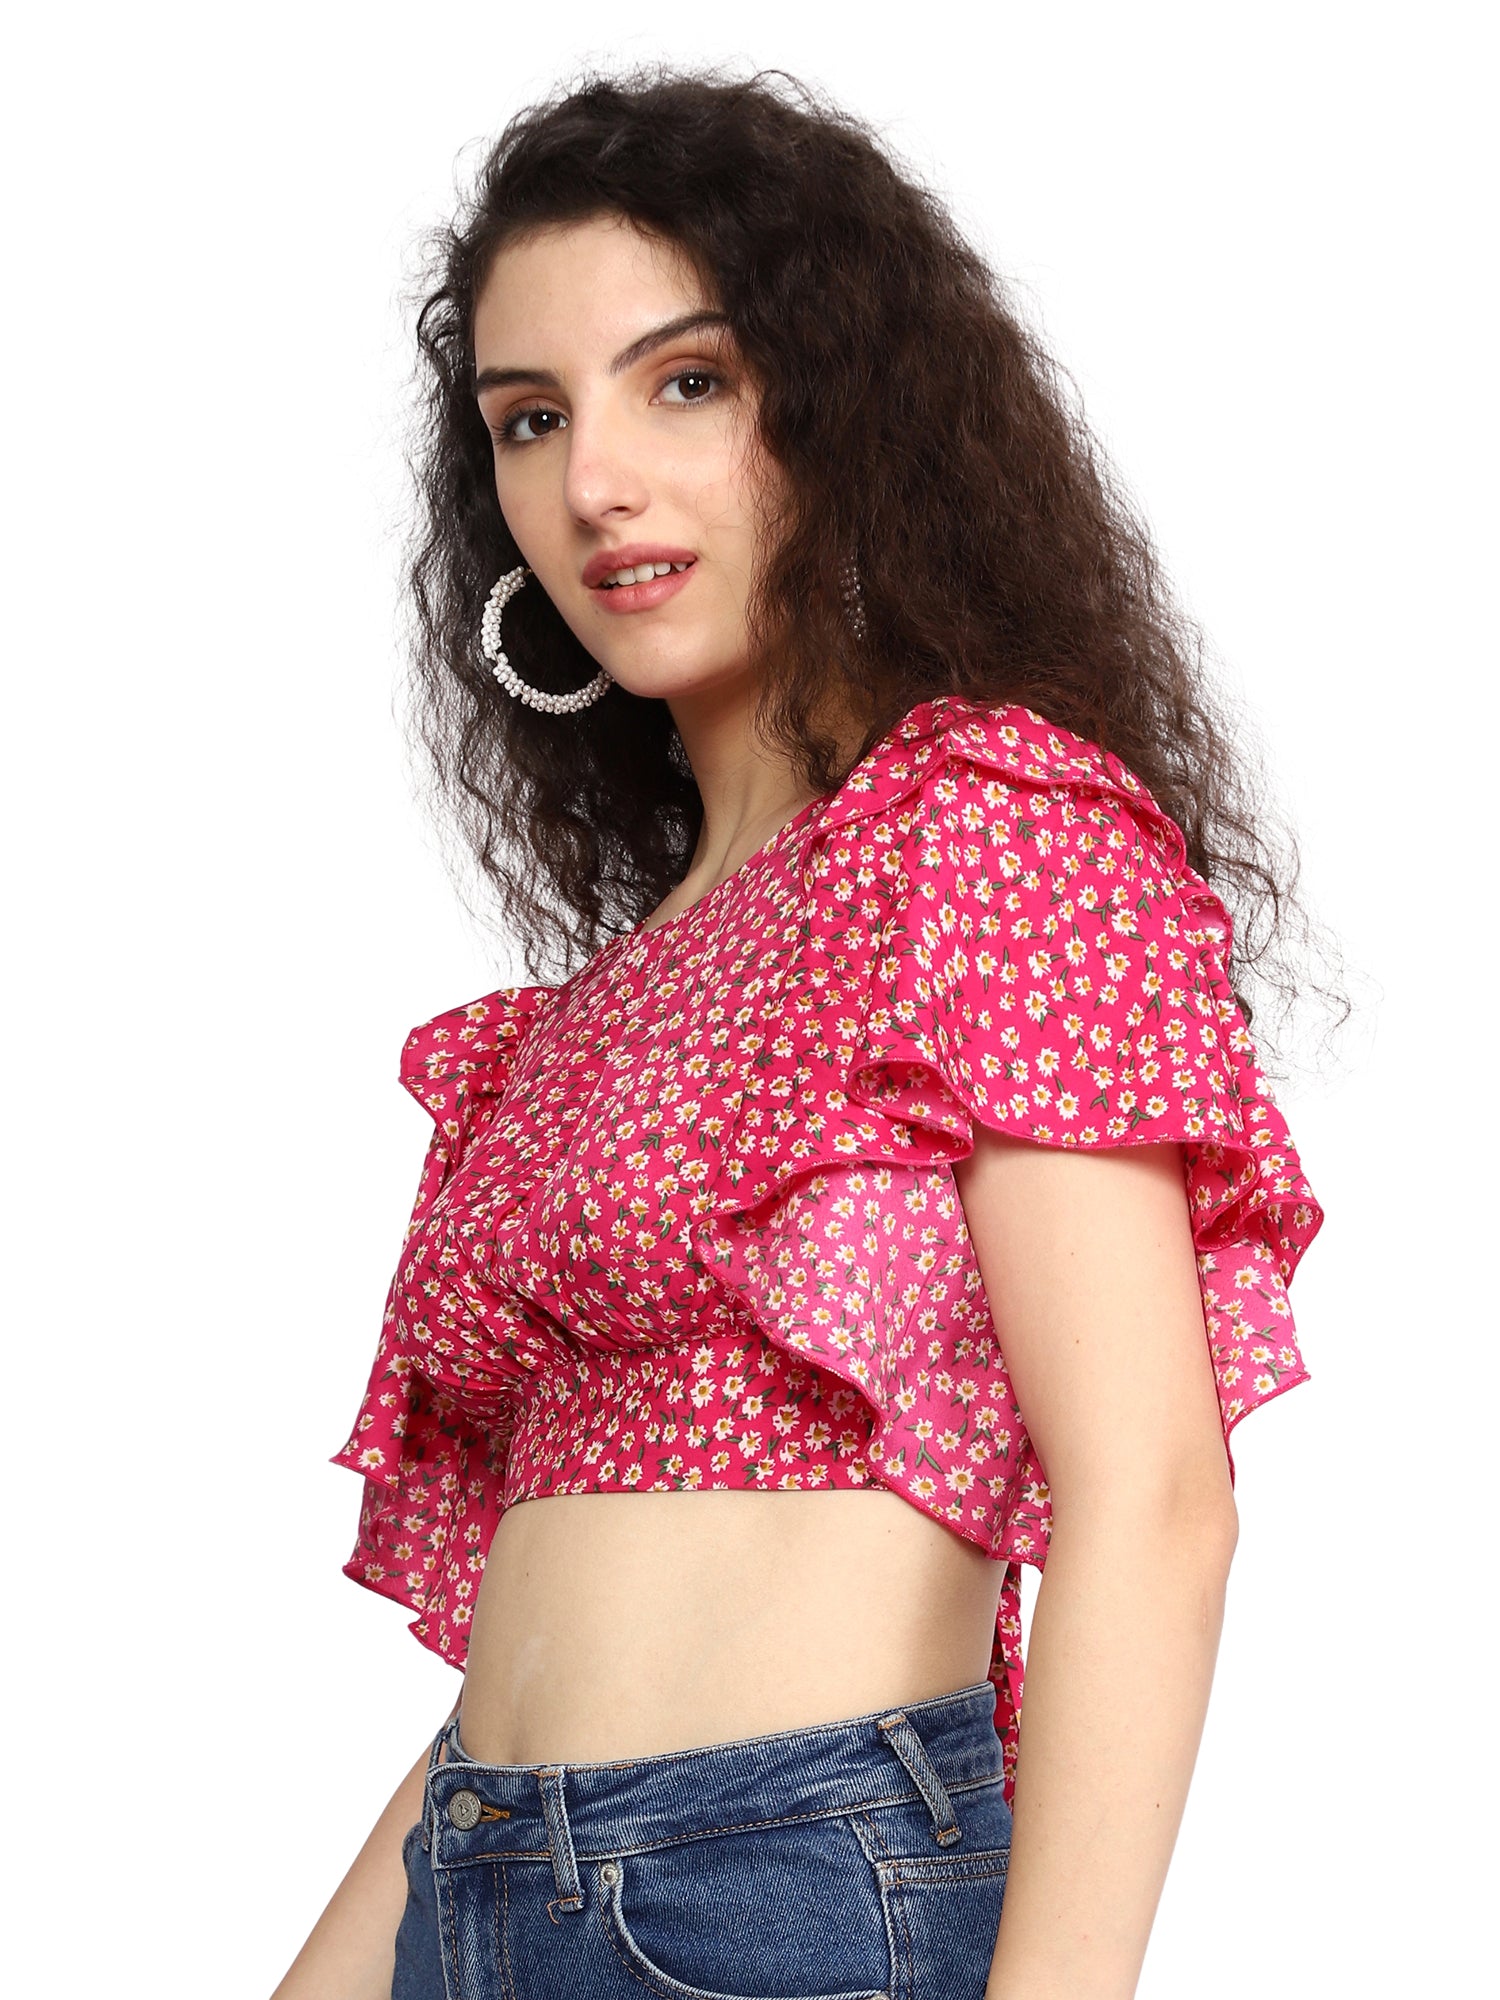 Pink Floral Print Boat Neck Top: Relaxed Fit